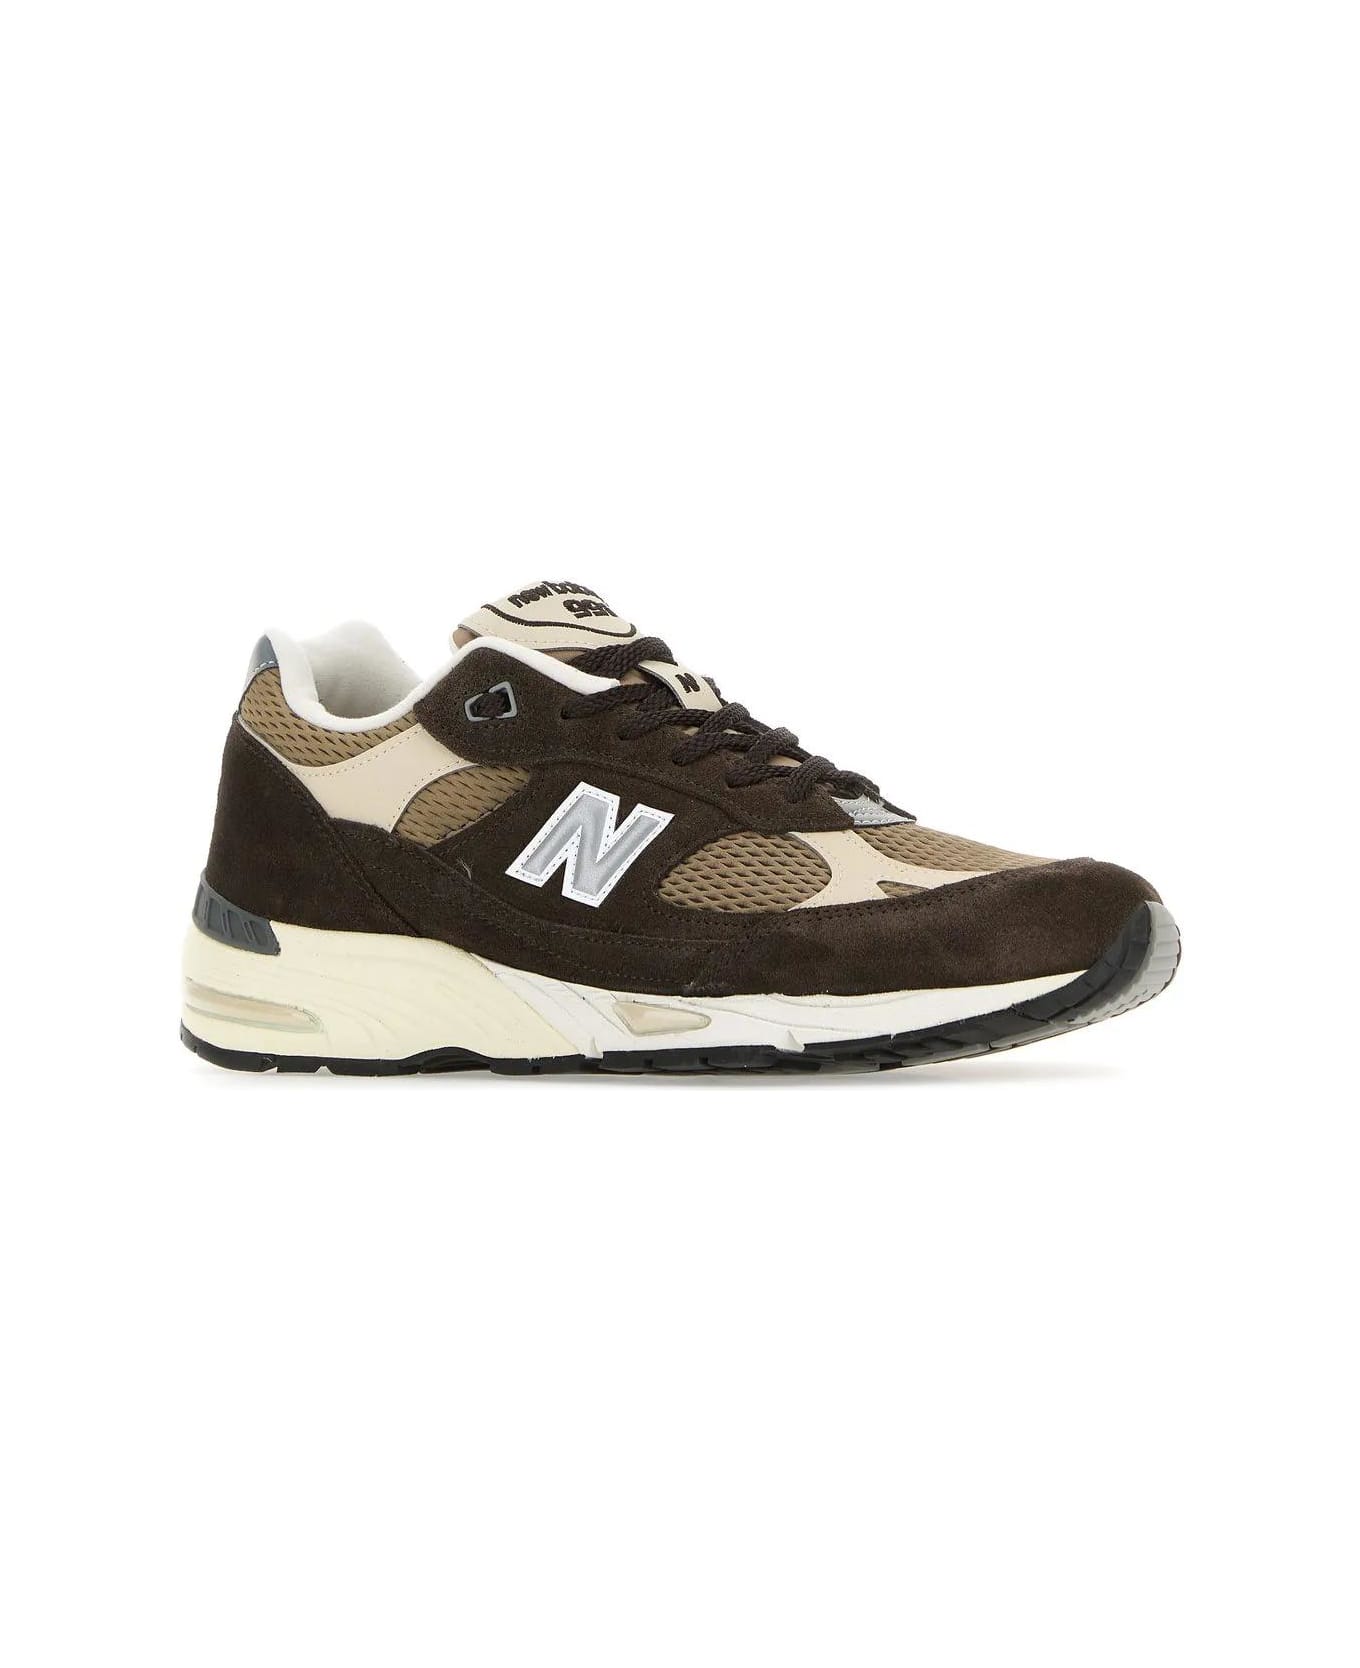 New Balance Brown Suede And Mesh 991v1 Sneakers - BROWN/NEUTRALS